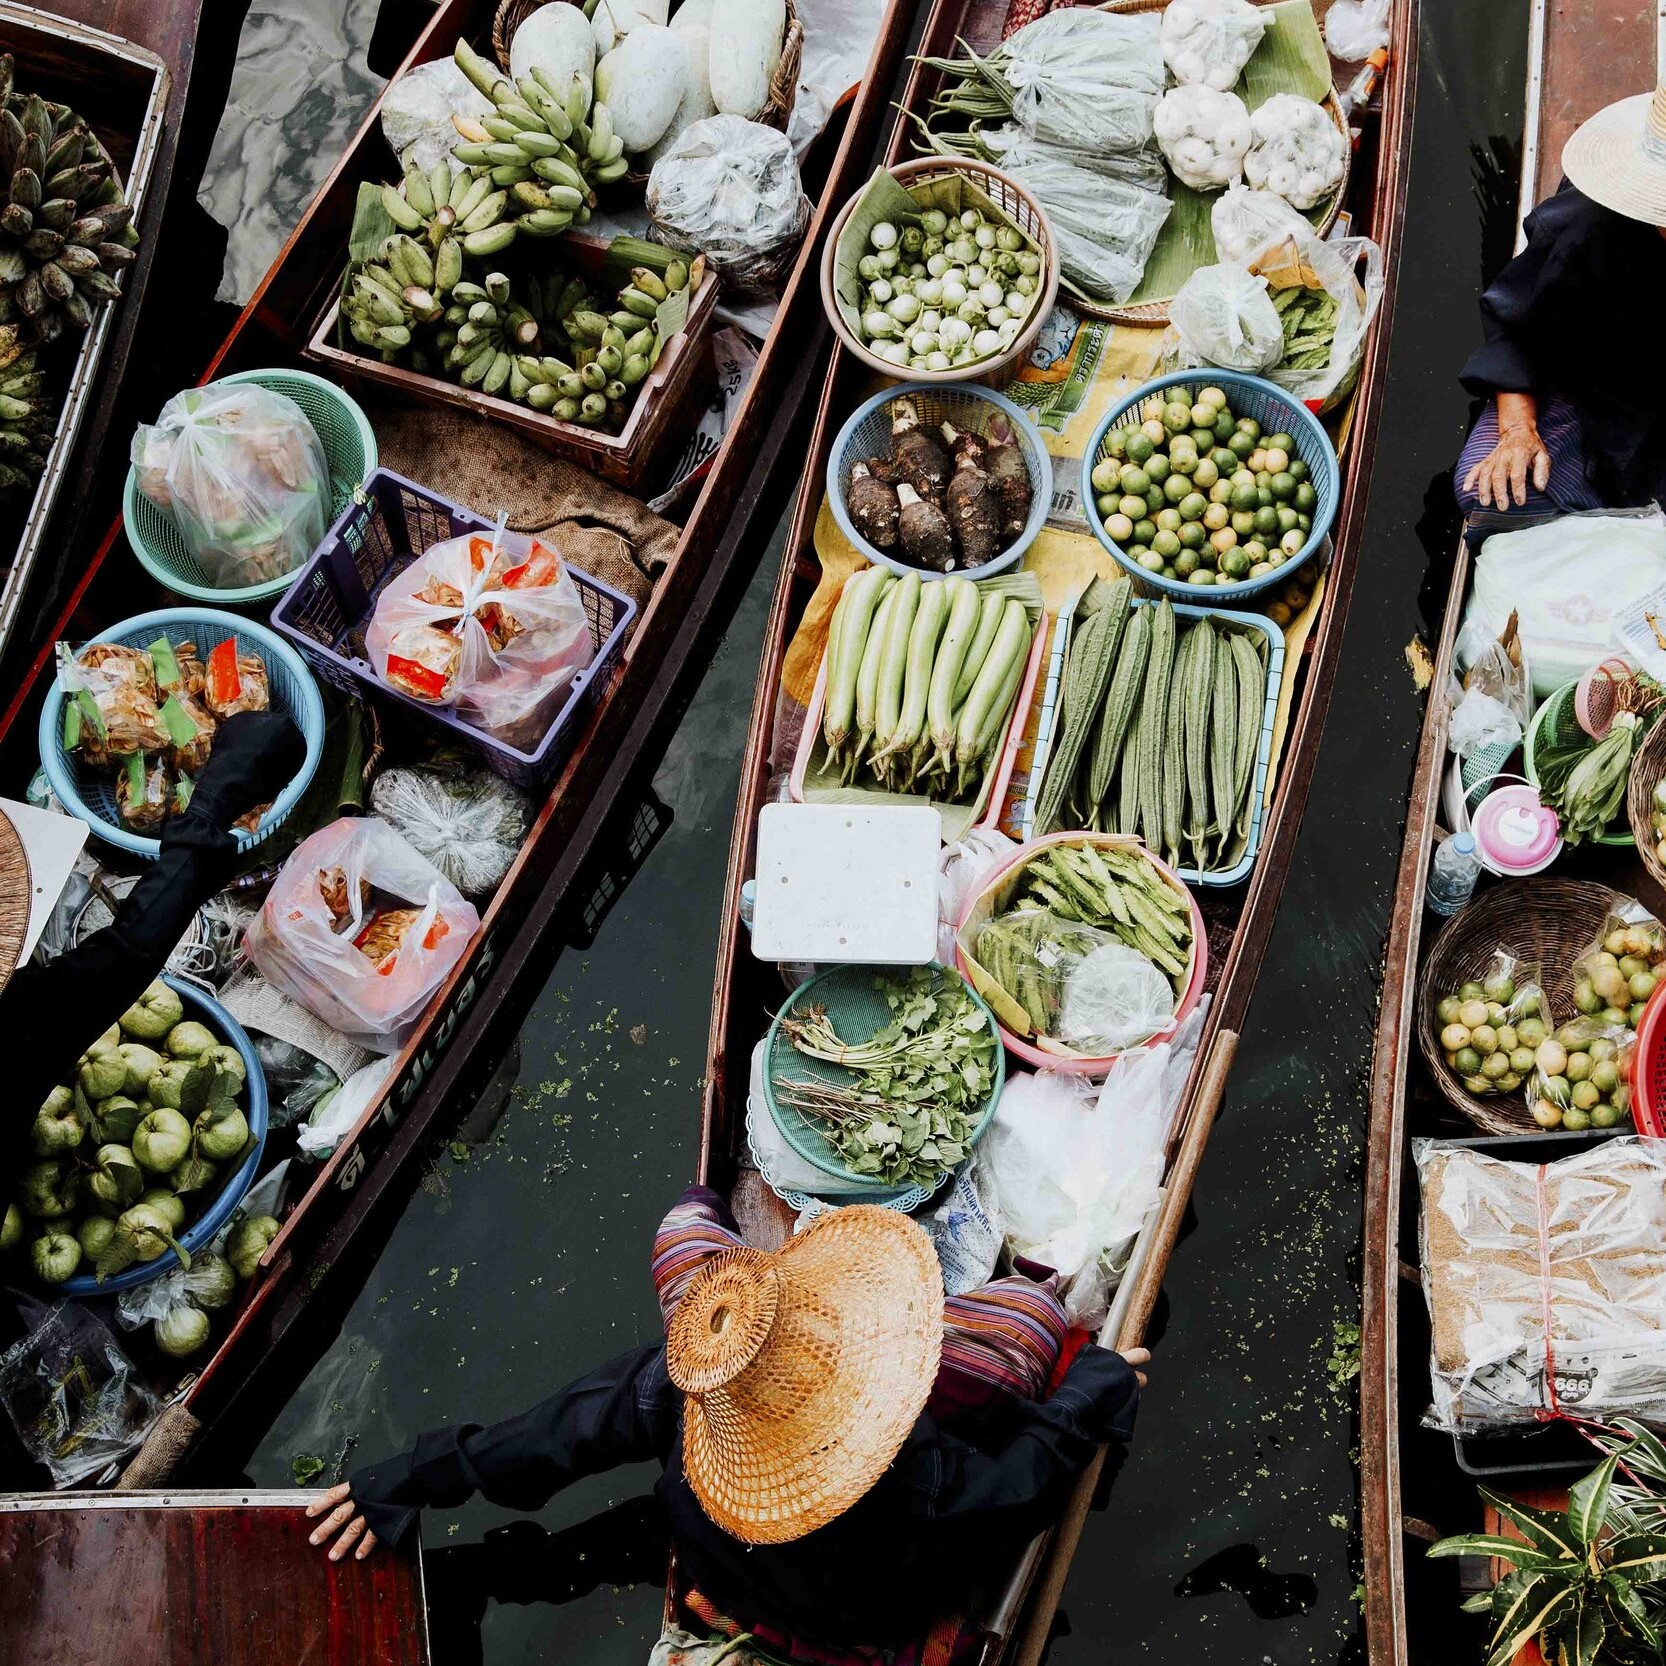 People selling items at floating market in Bangkok on Thailand itinerary 1 month